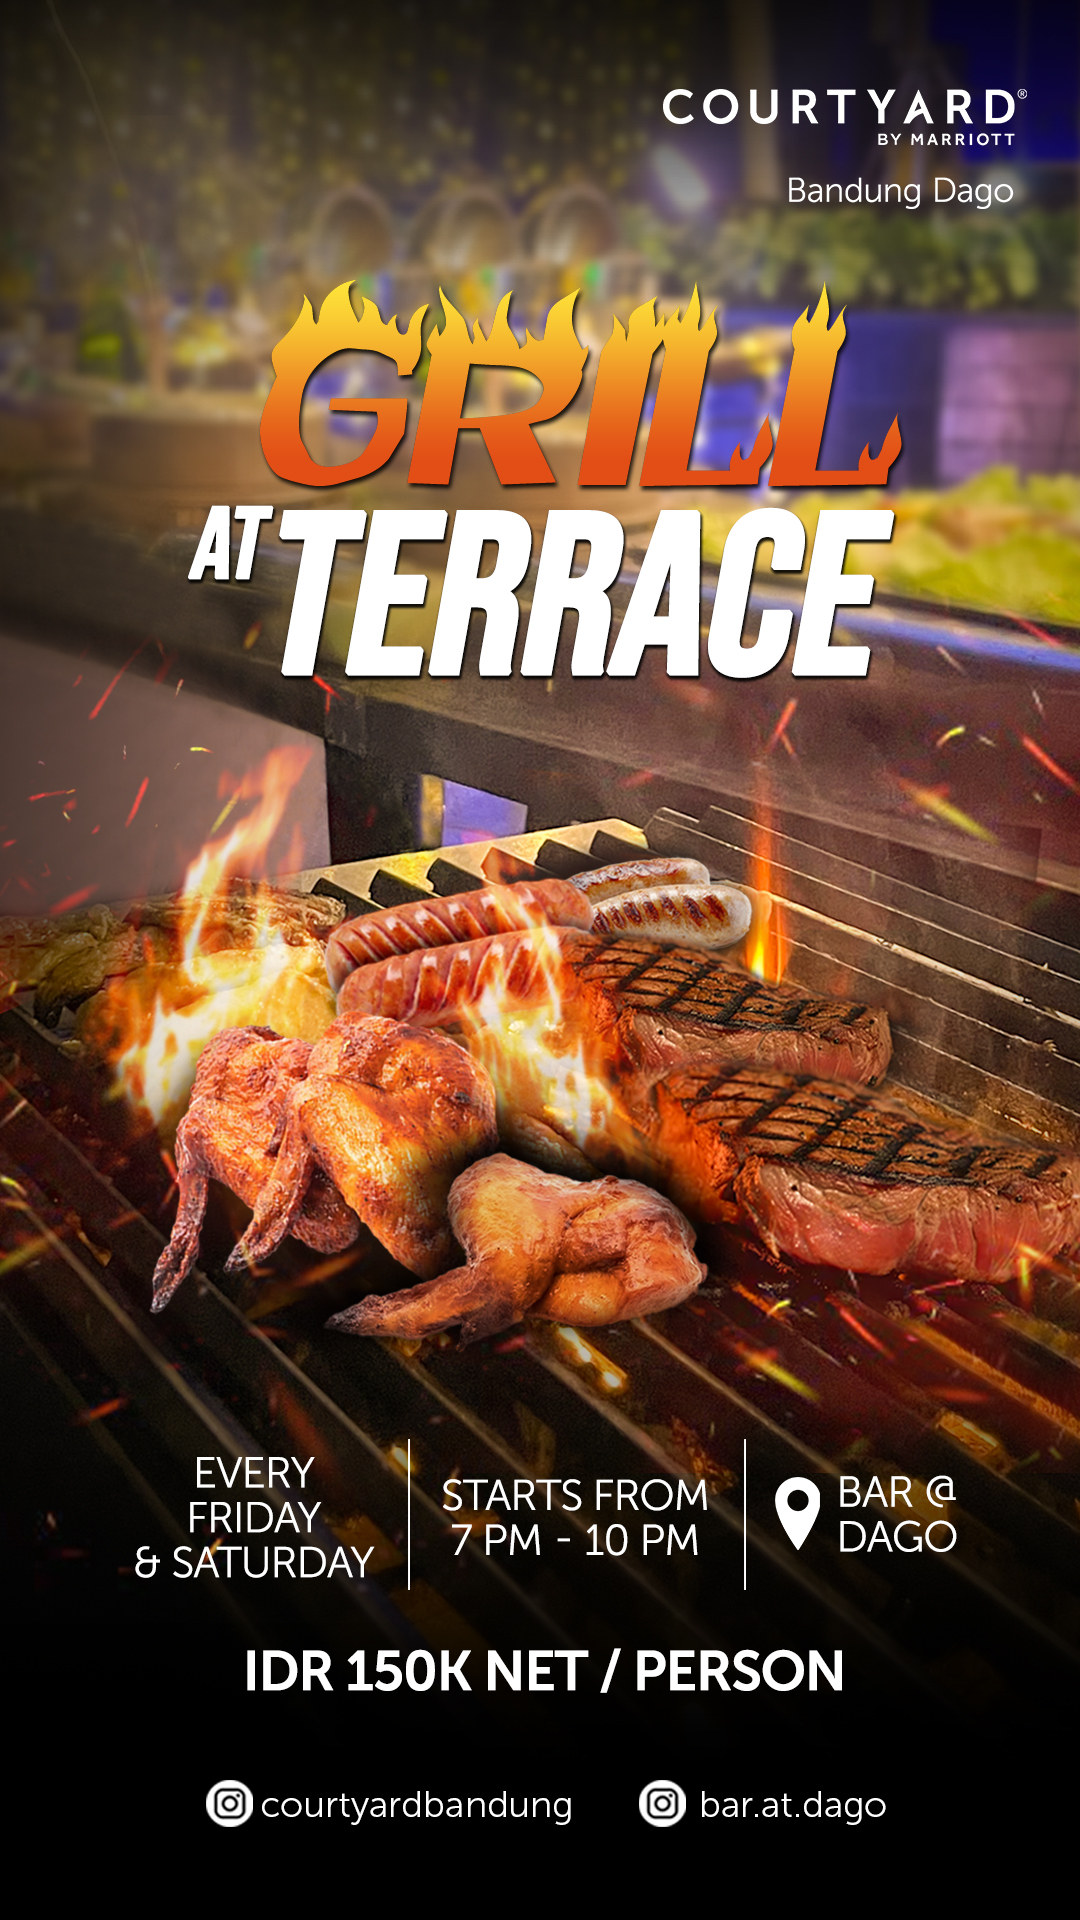 Grill At Terrace